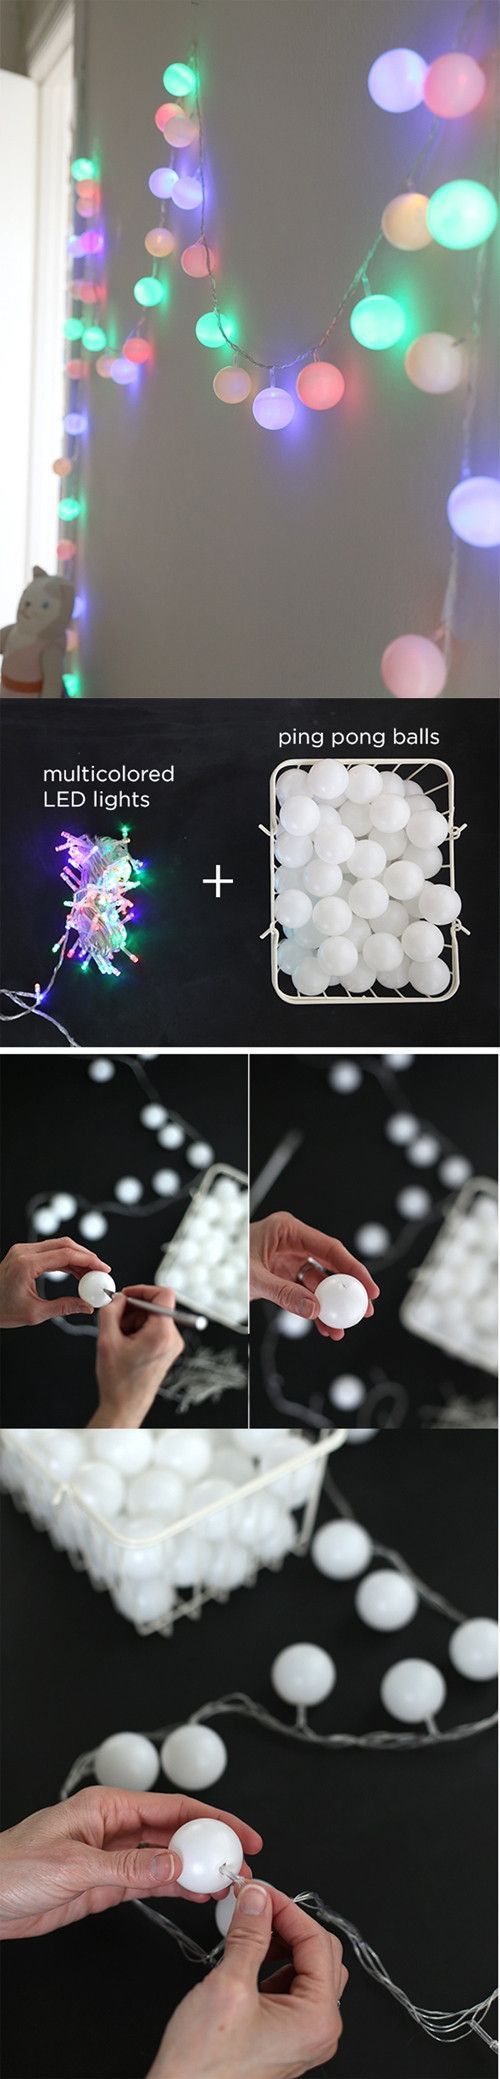 Use ping pong balls and LED lights to create cool colored lights that will make your dorm look cozy at night.    Read more: